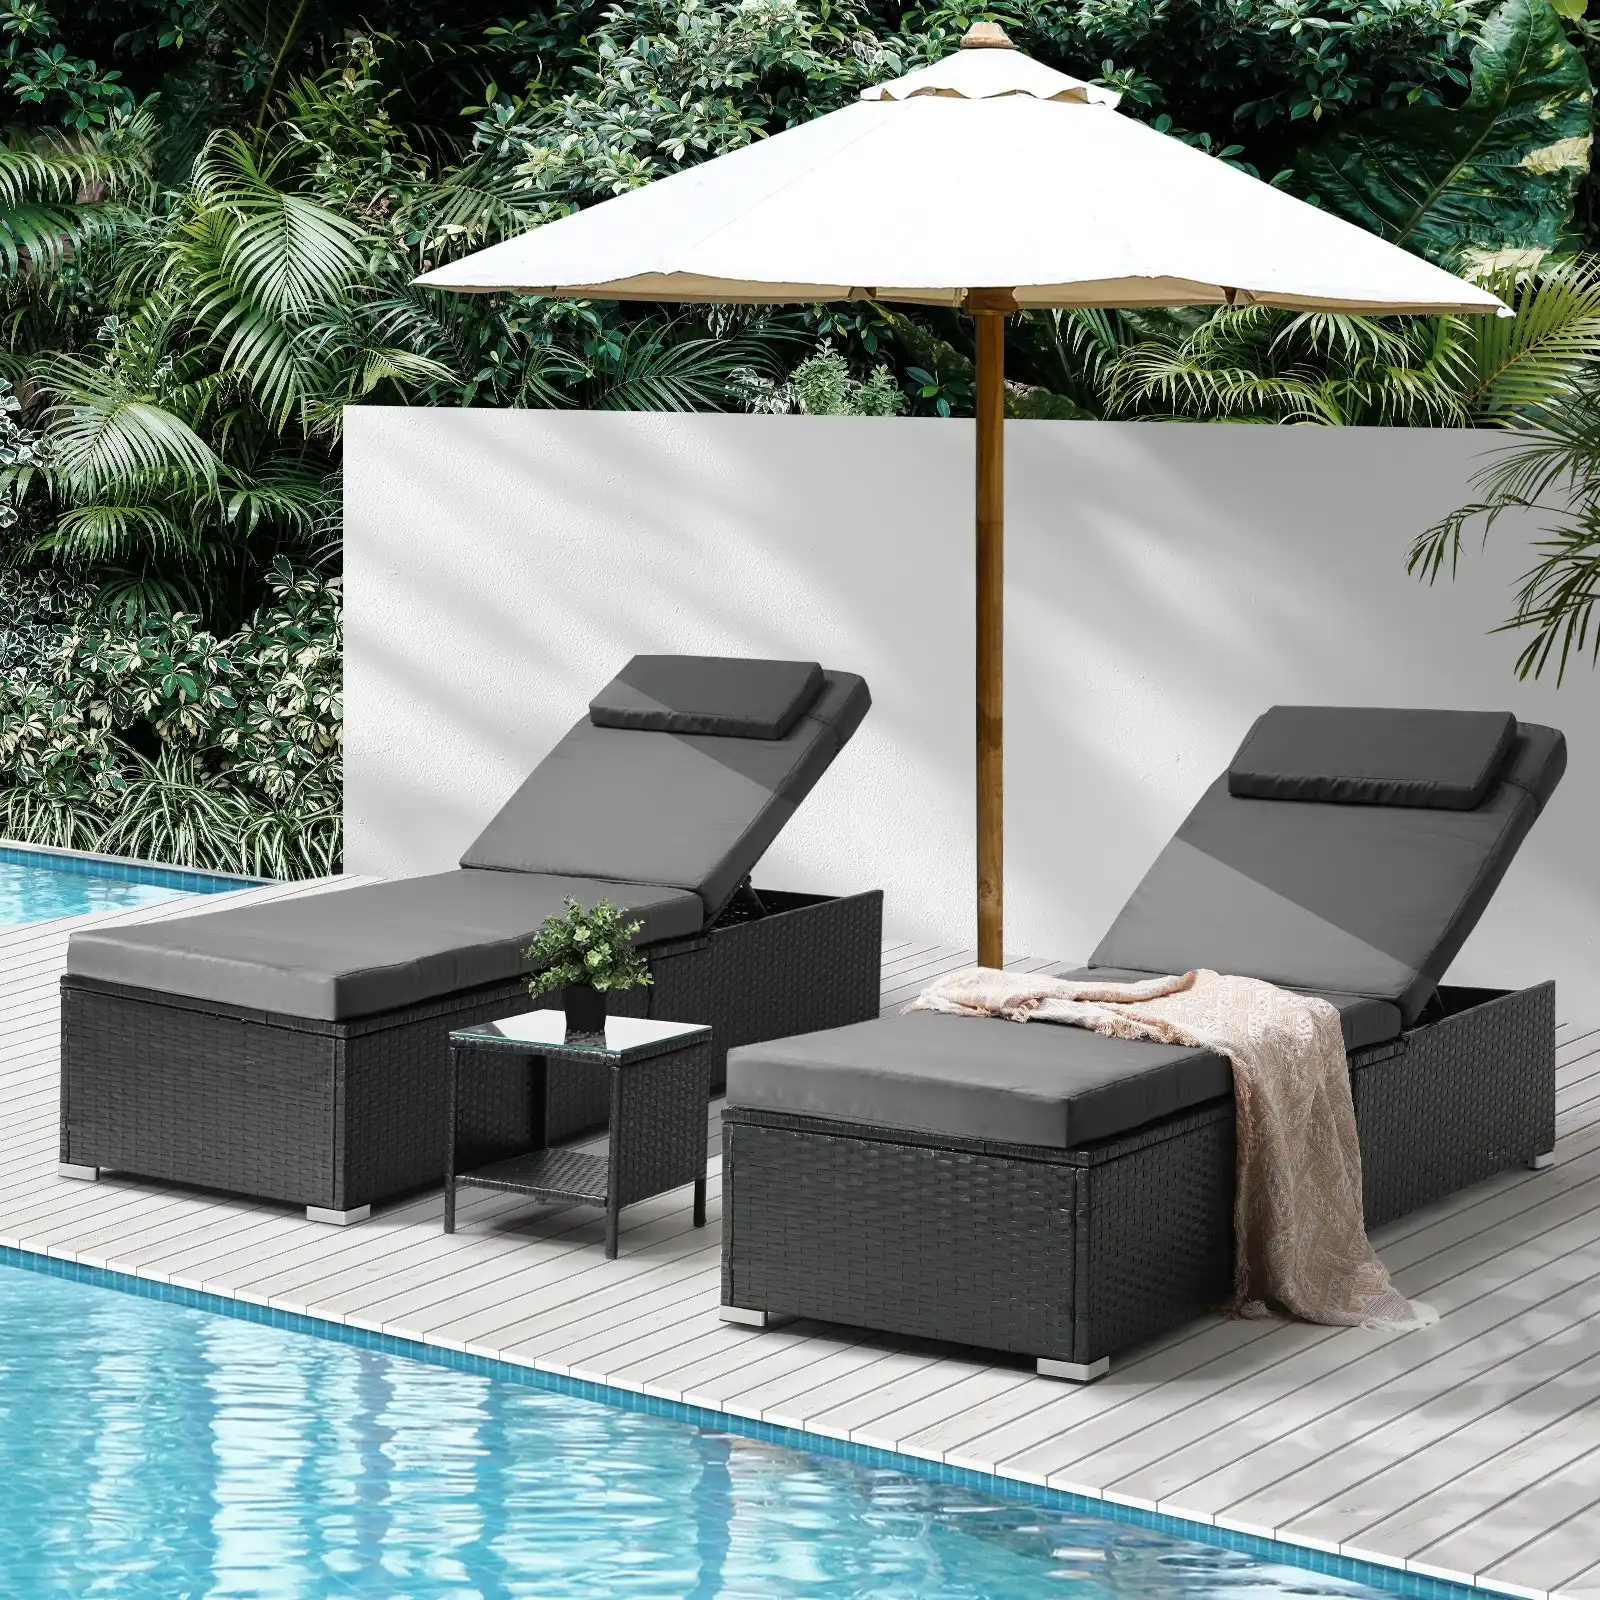 Livsip 2X Sun Lounge Wicker Lounger Table Setting Outdoor Furniture Day Bed